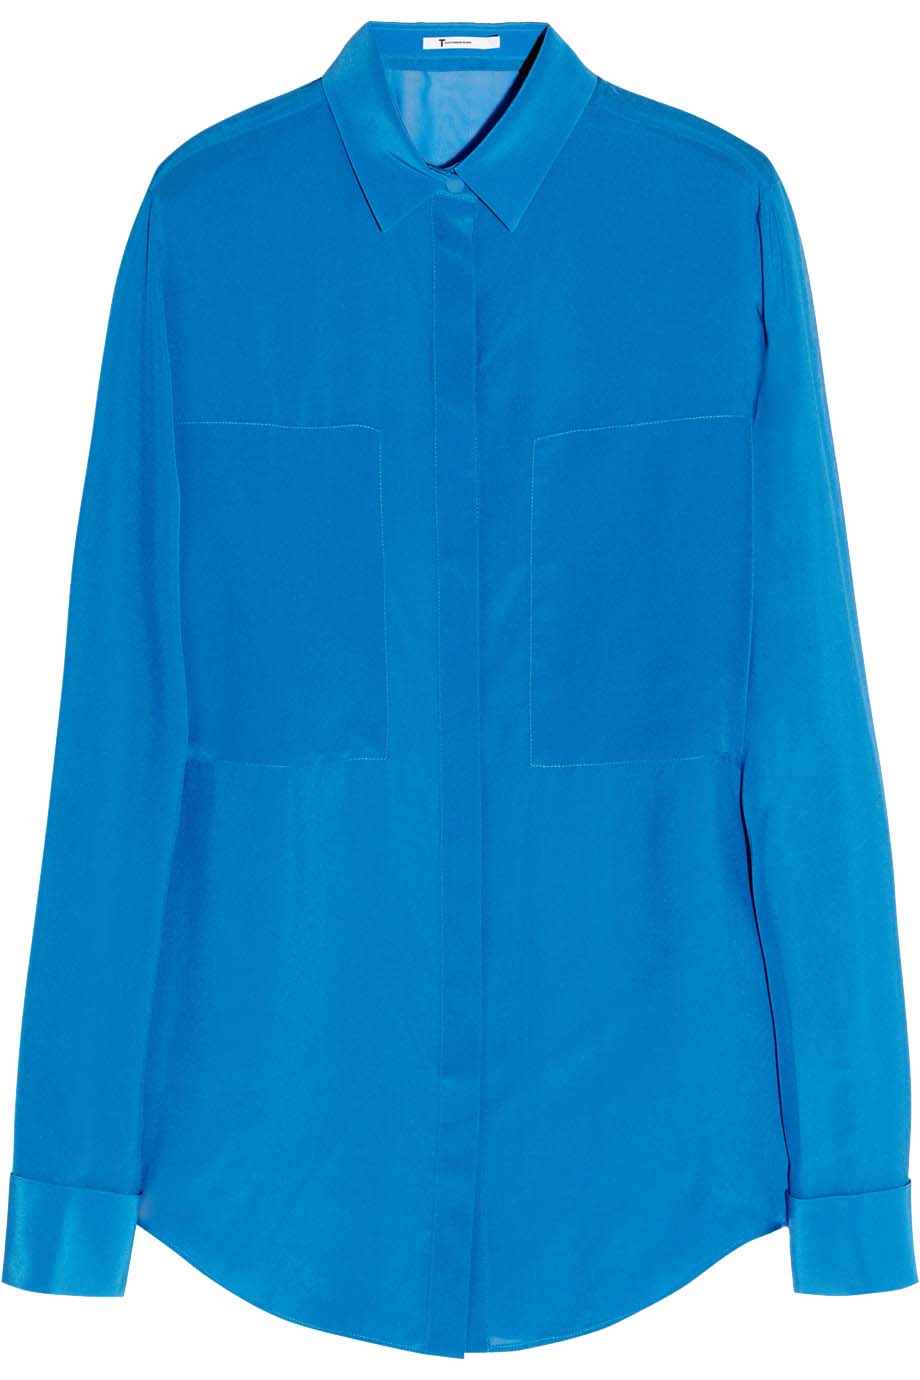 Turquoise T By Alexander Wang paneled silk blouse